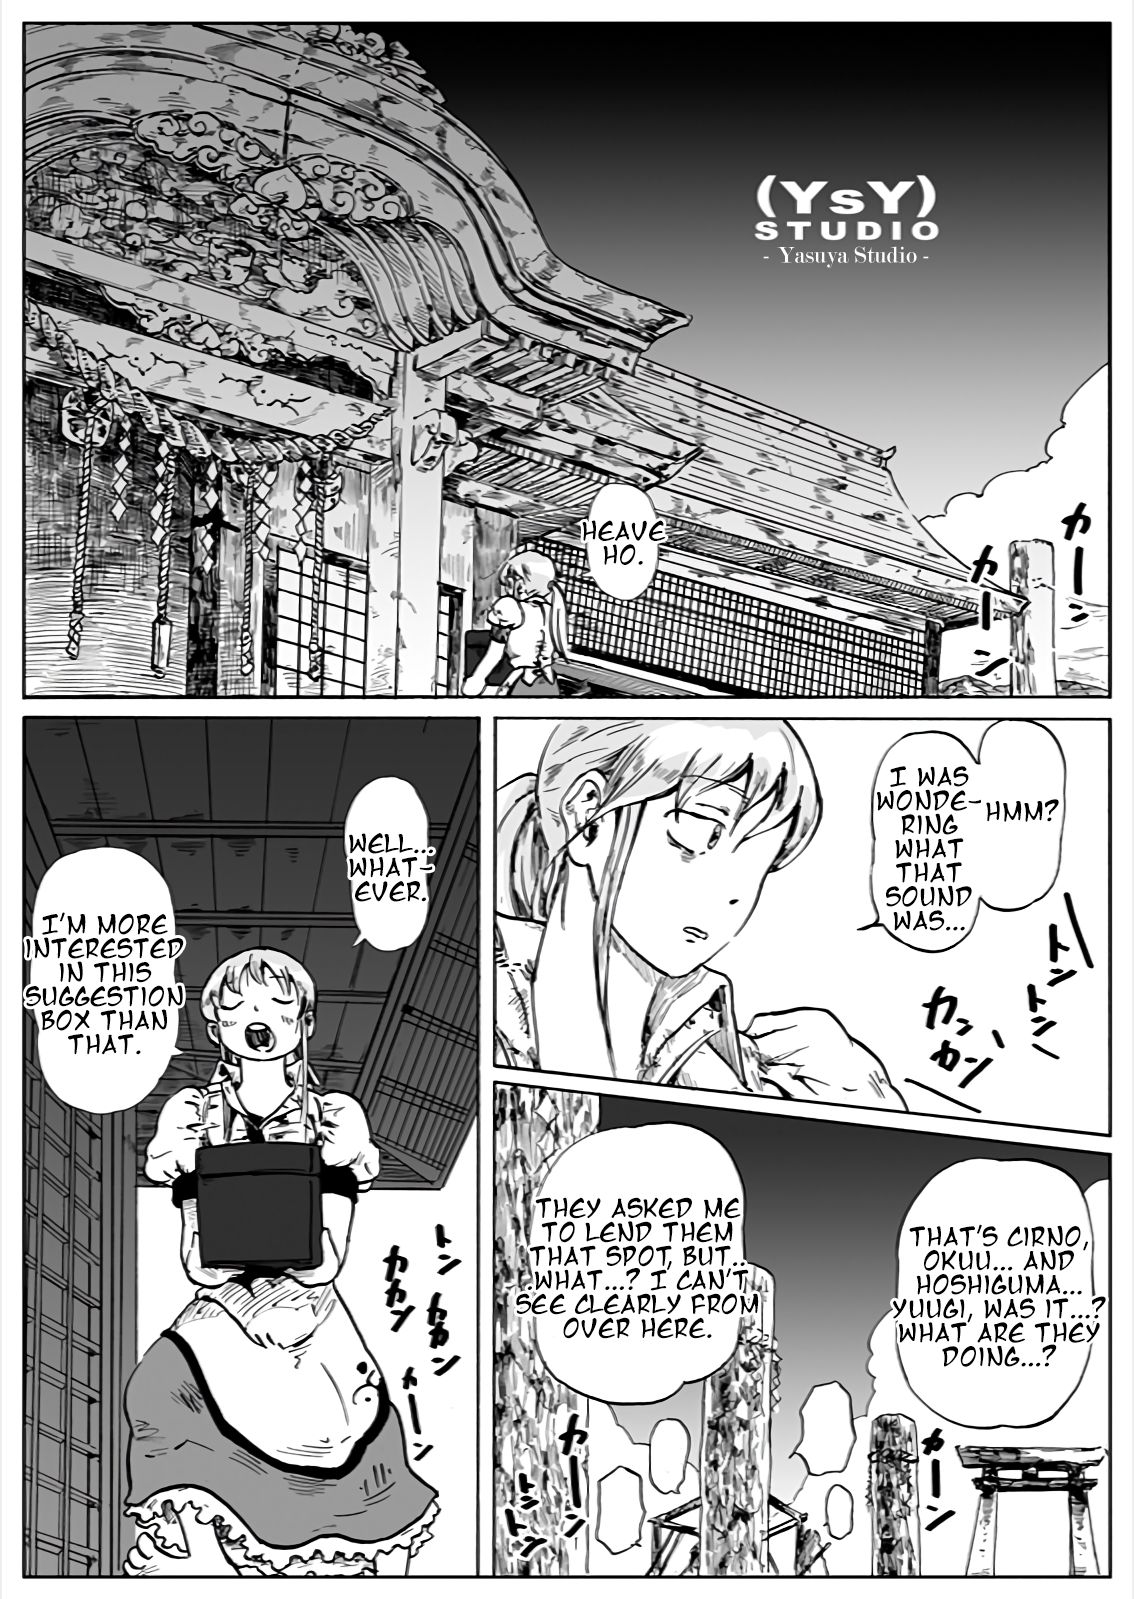 [YSYSTUDIO ((YsY)s)] Cirno Tenchou | Cirno the Stall Manager (Touhou Project) [English] [Digital] 11